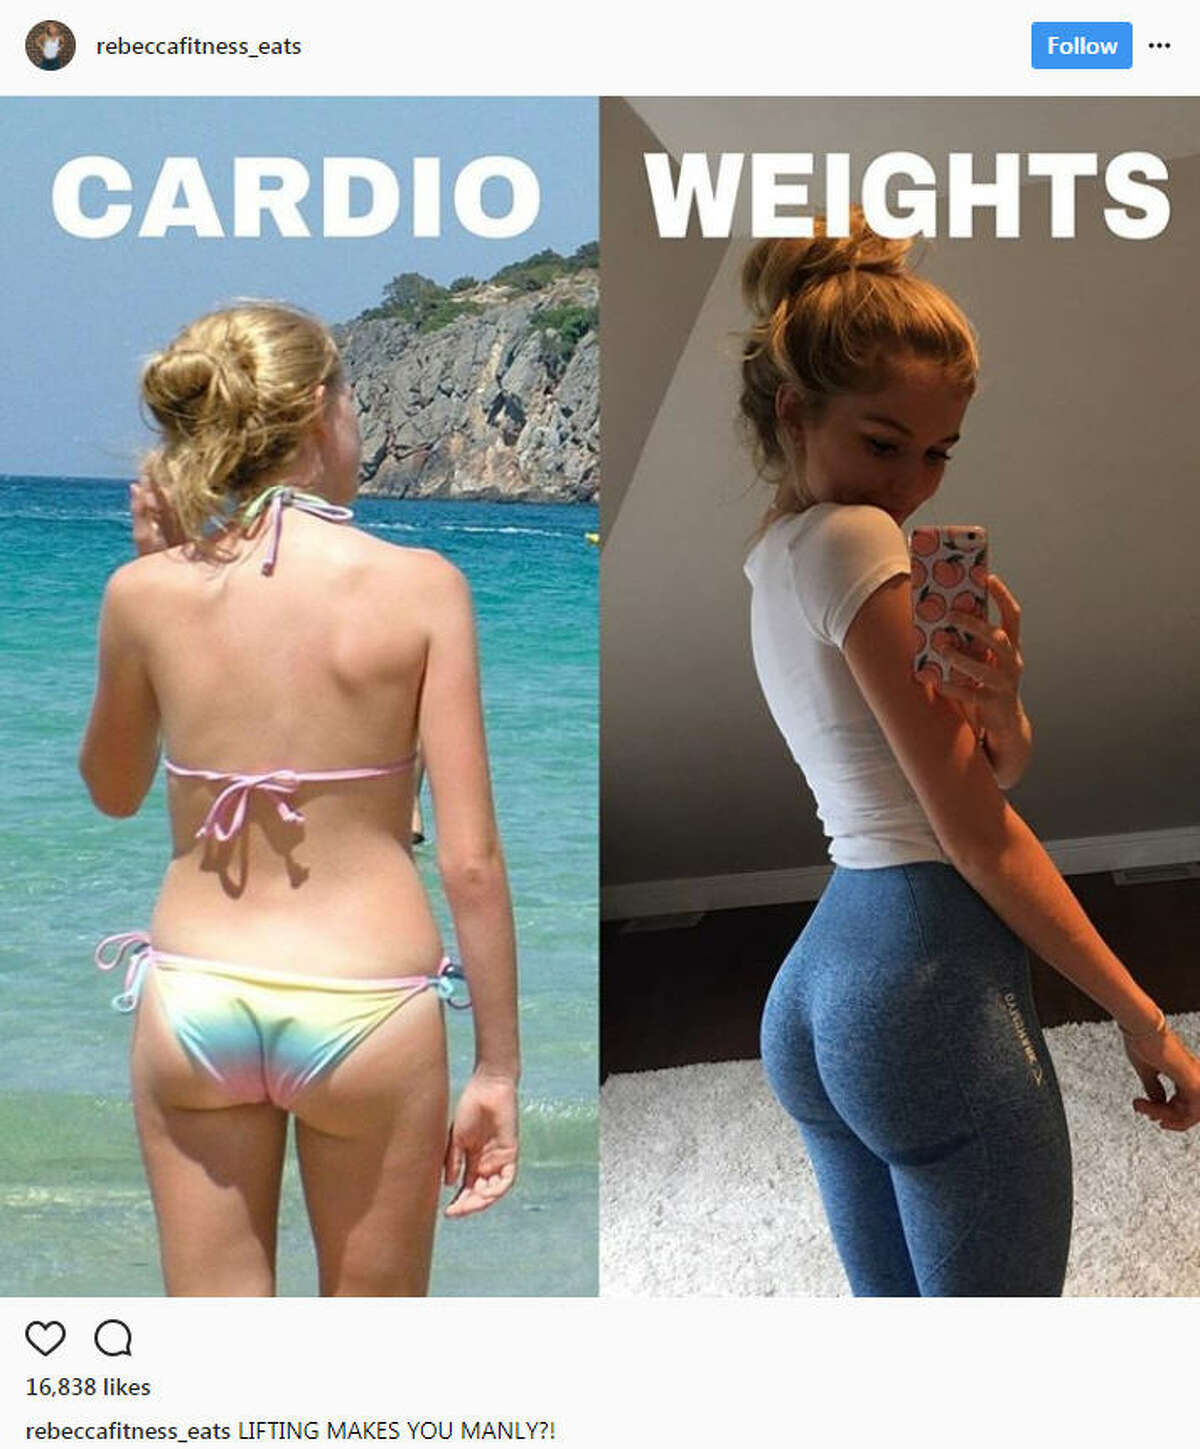 Women across Instagram are pointing out their success stories in working with weights to tone their bodies in an effort to prove that weights aren't going to bulk a woman up.Source: Instagram